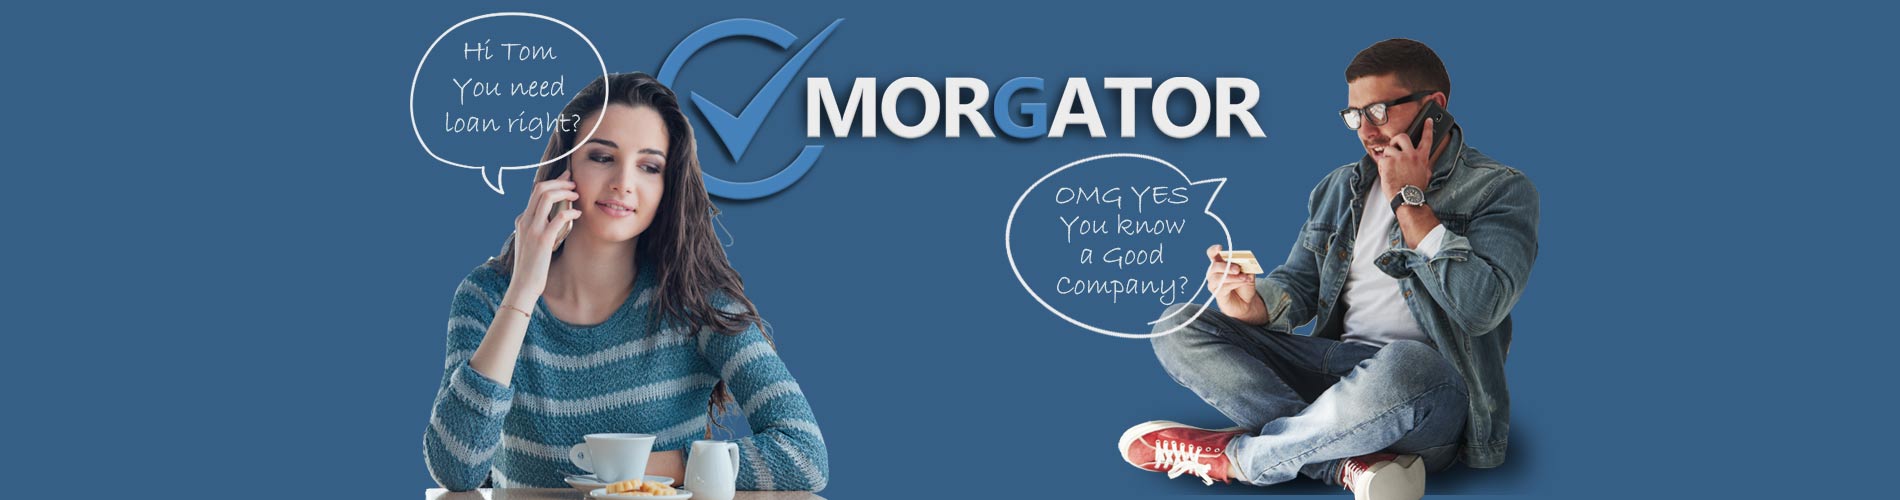 how morgator works